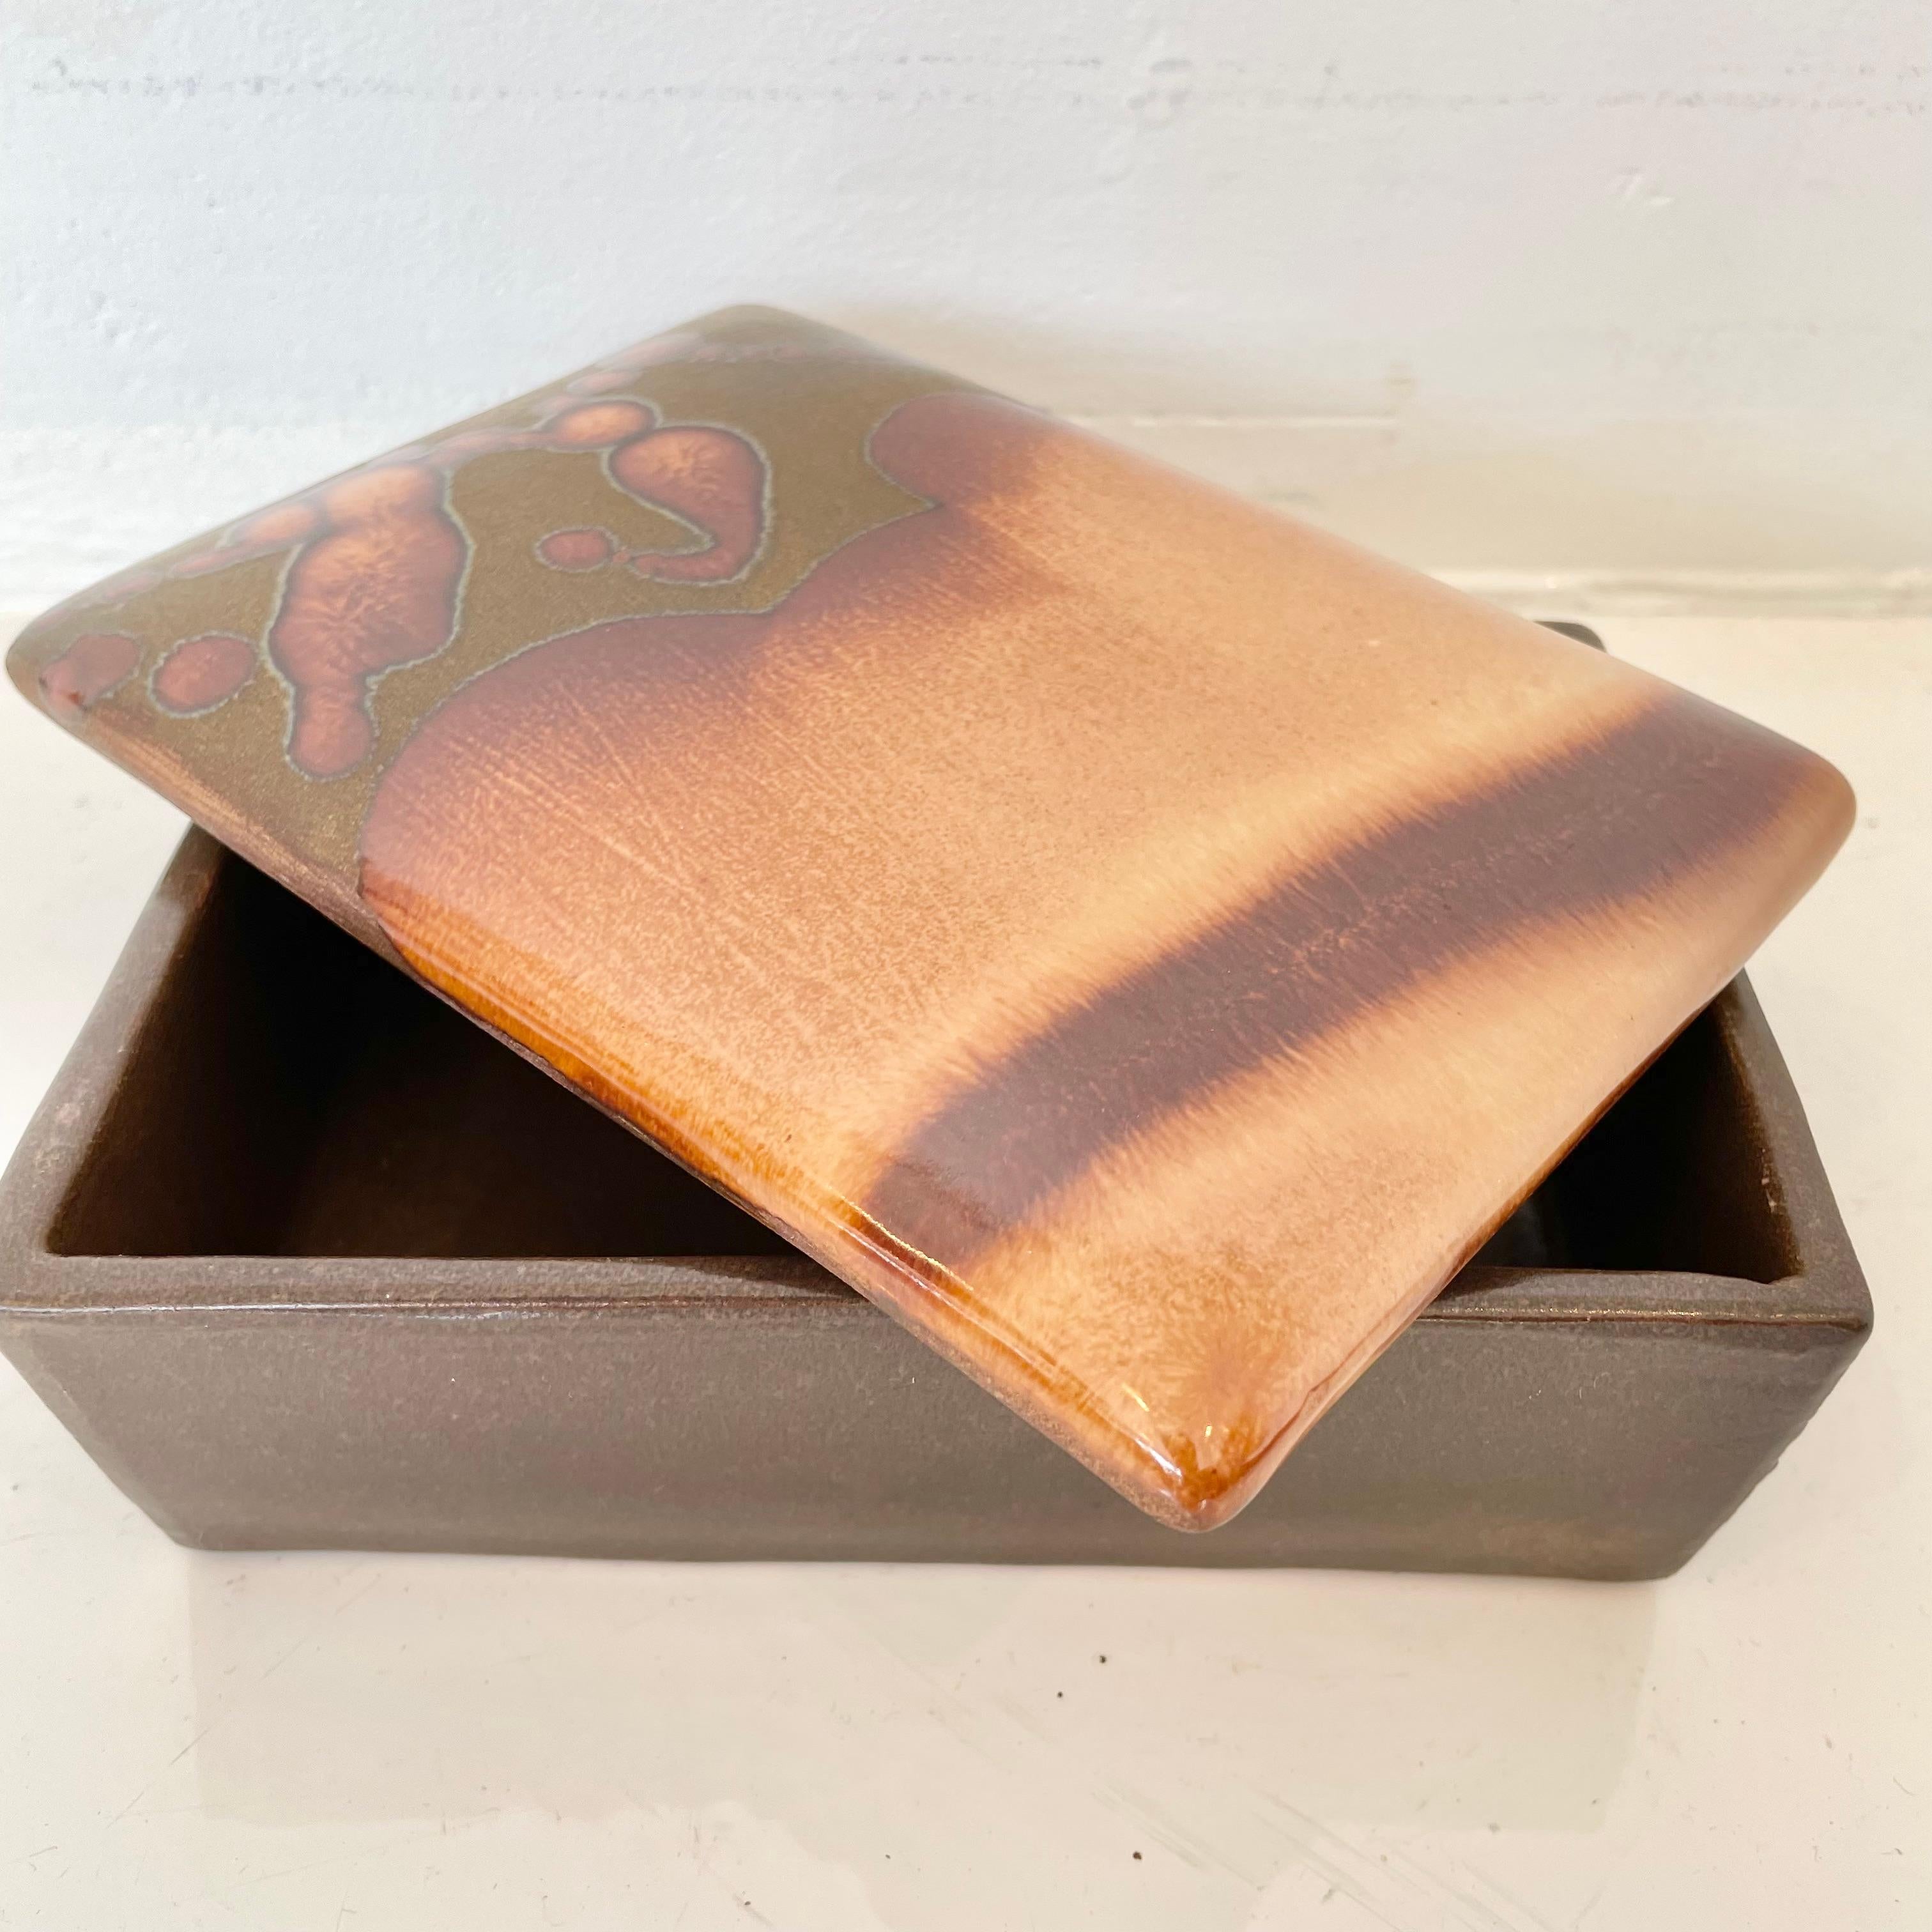 Drip glaze ceramic box made in Italy, circa 1970s. Grainy finish along with high gloss accents in a beautiful chocolate brown and tan giving it great depth. Great vintage condition. Fun stash box and tabletop object. Marked Italy on underside.